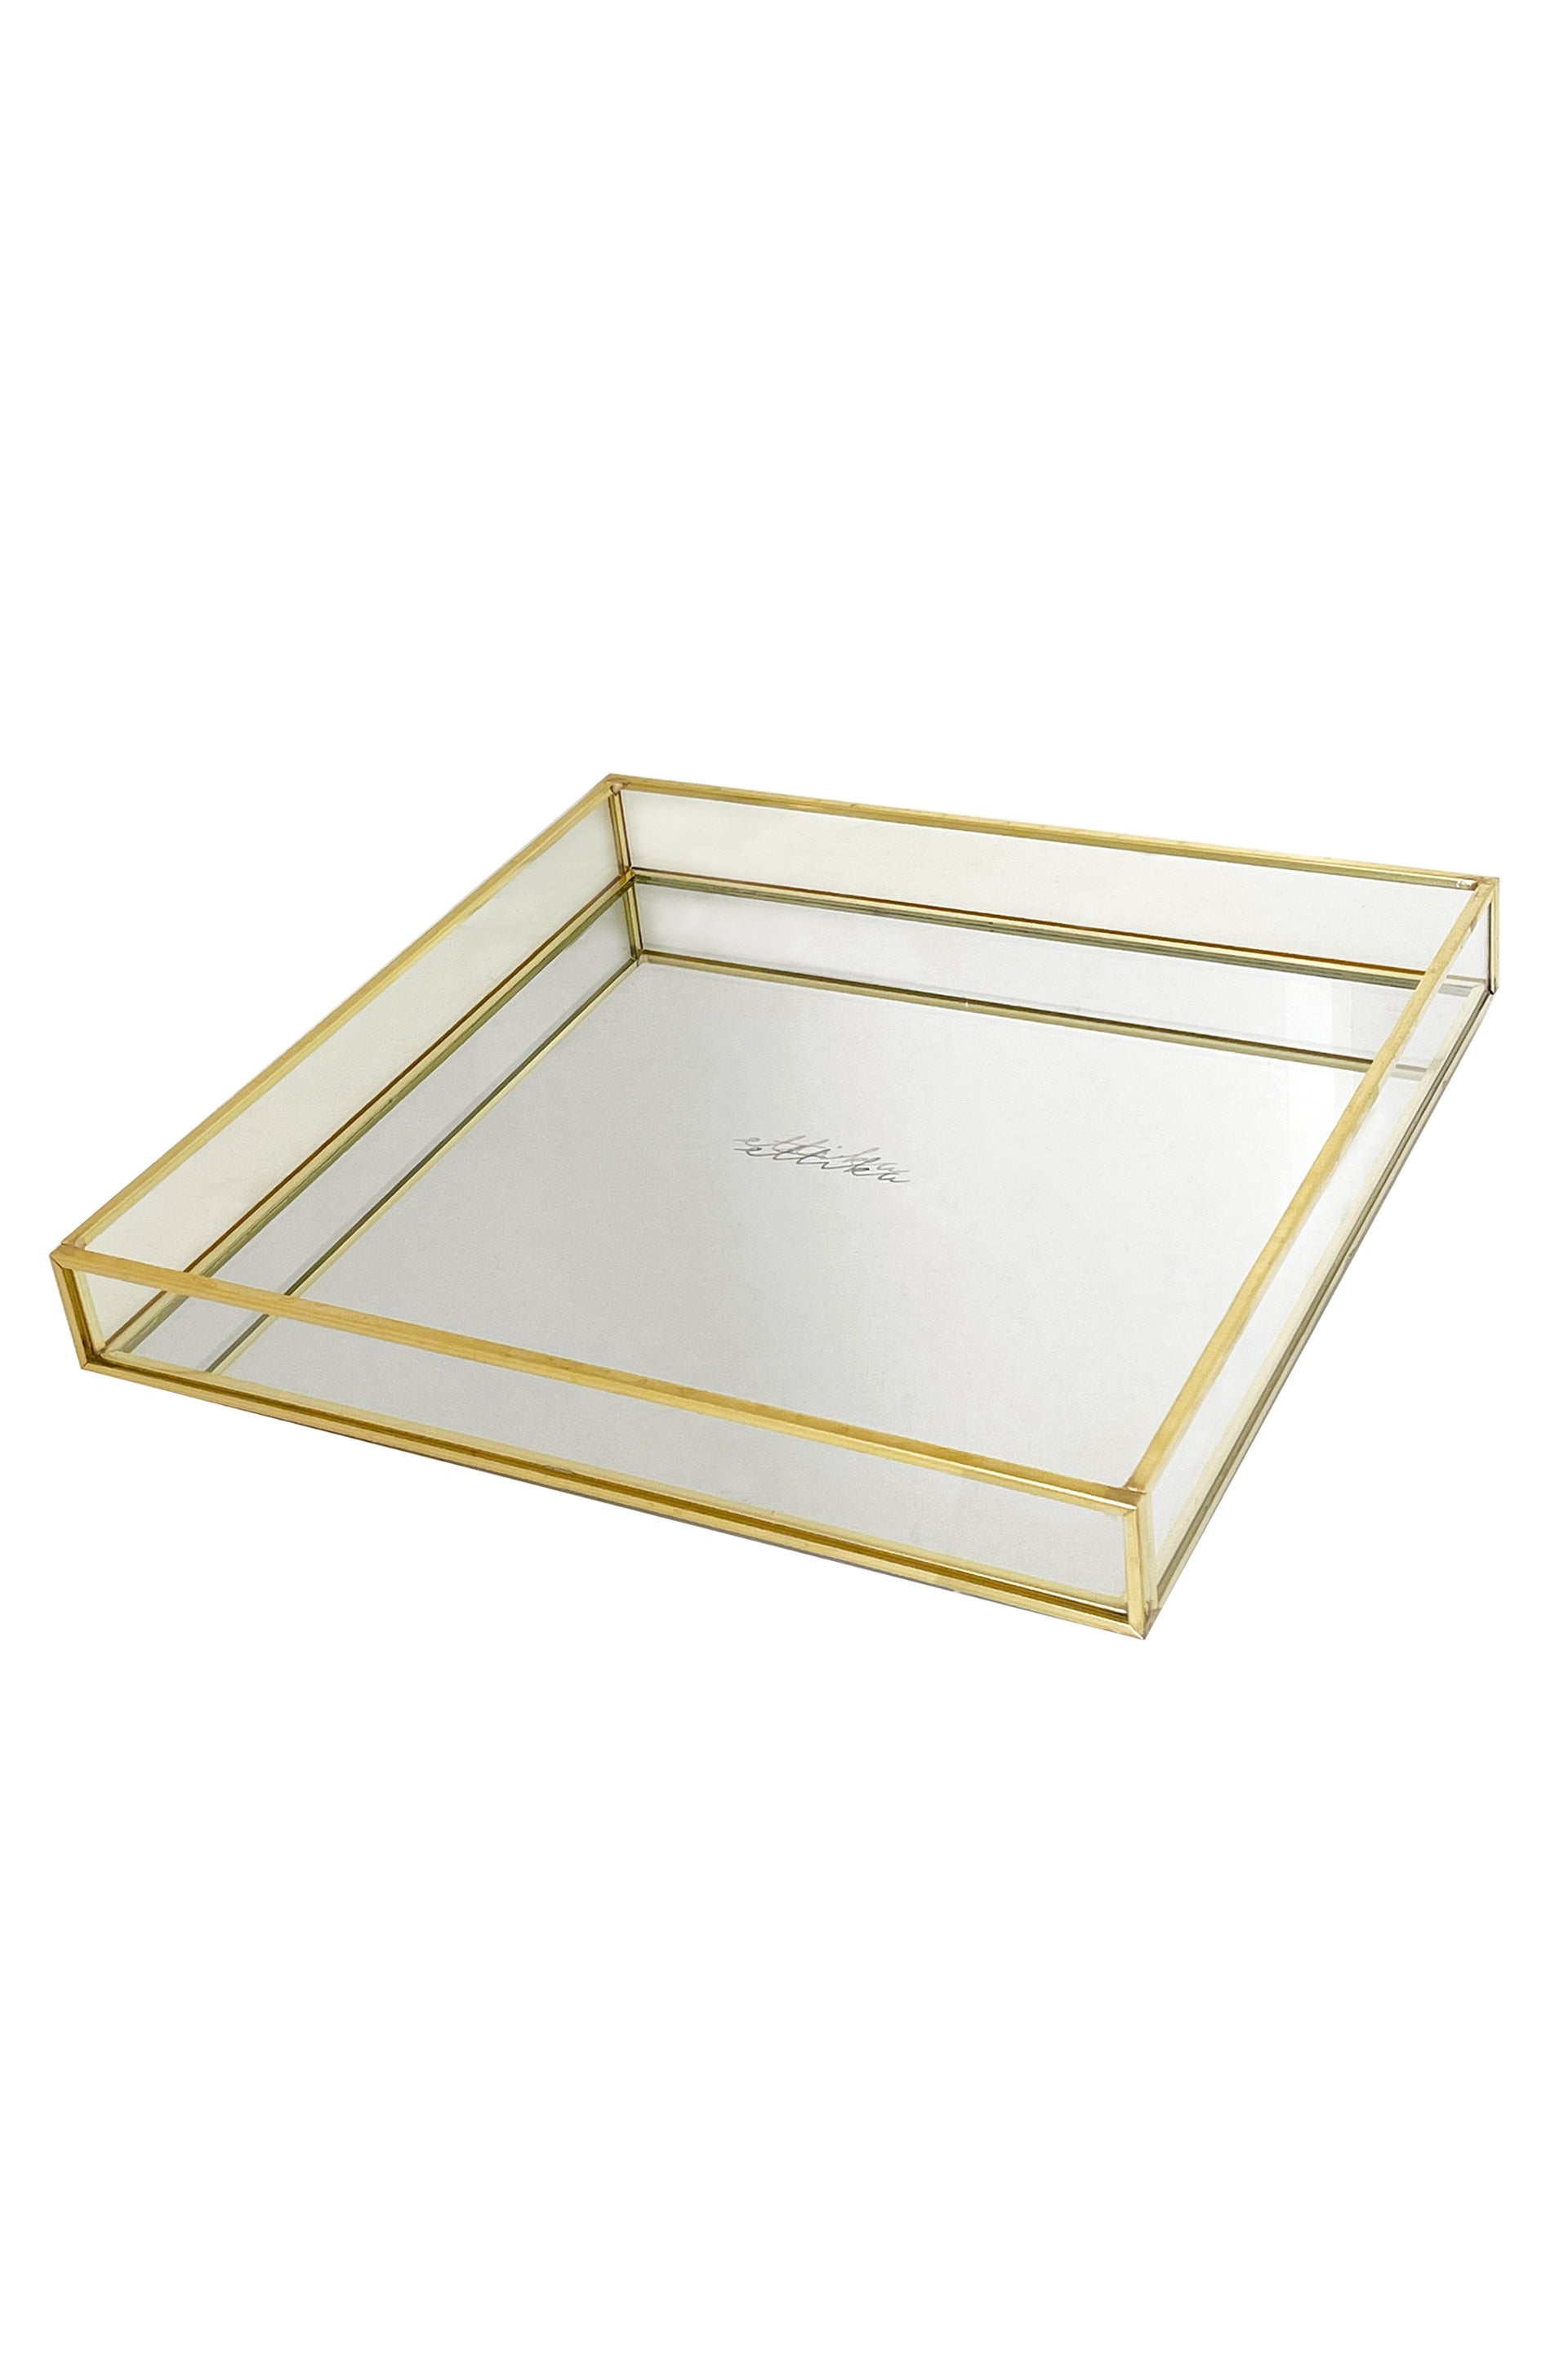 Large Square Mirror Bottom Jewelry and Display Tray on white